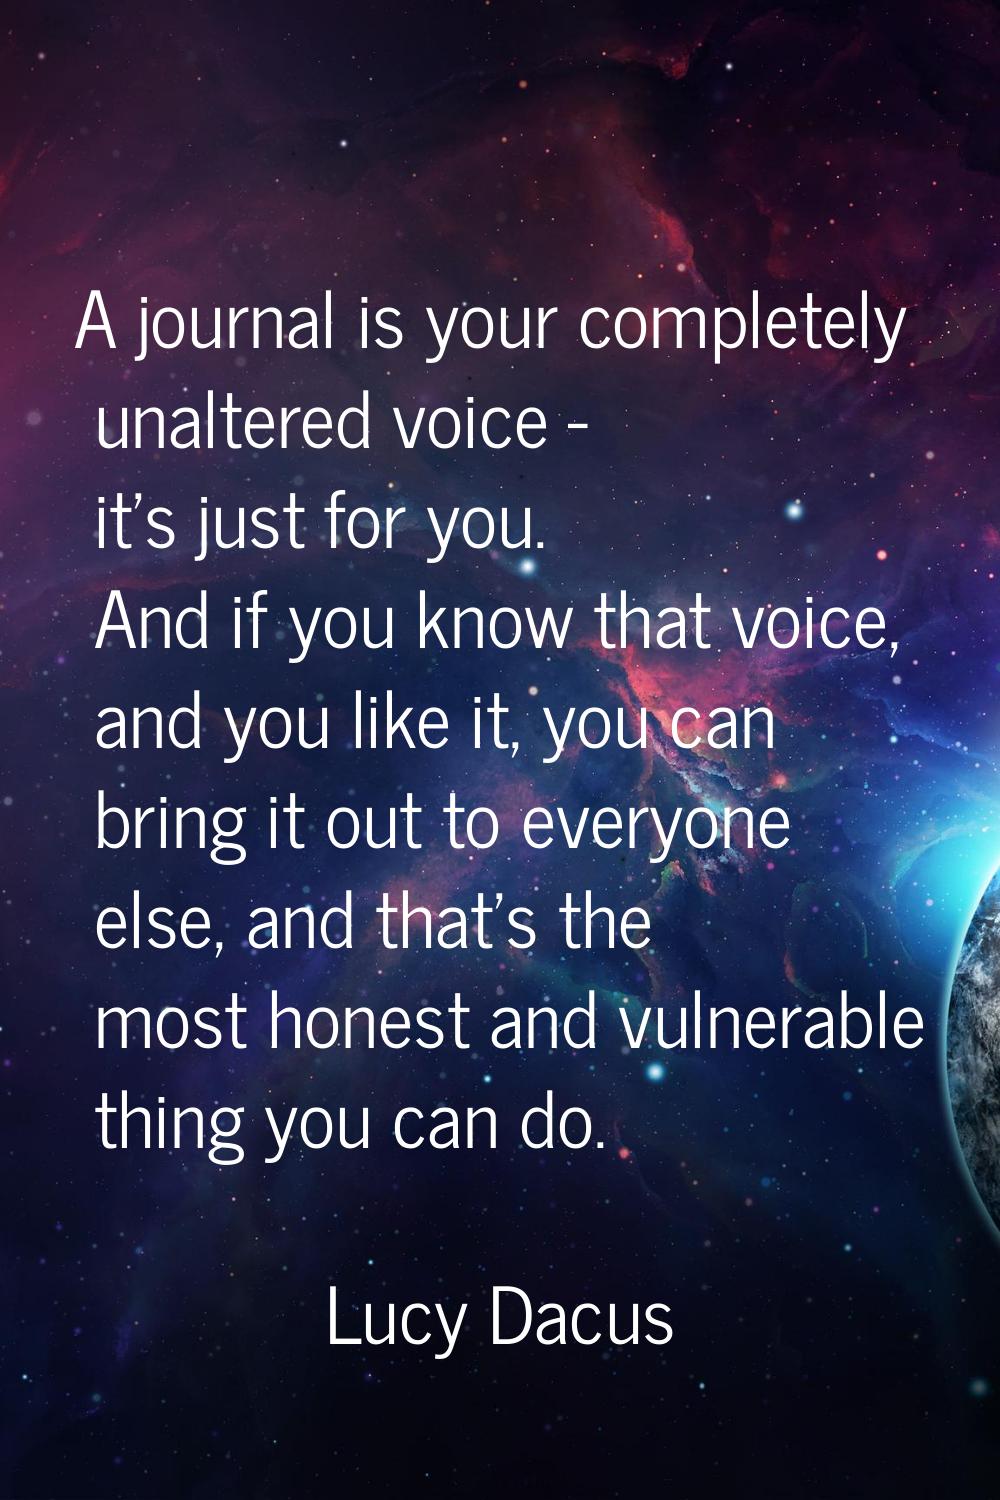 A journal is your completely unaltered voice - it's just for you. And if you know that voice, and y